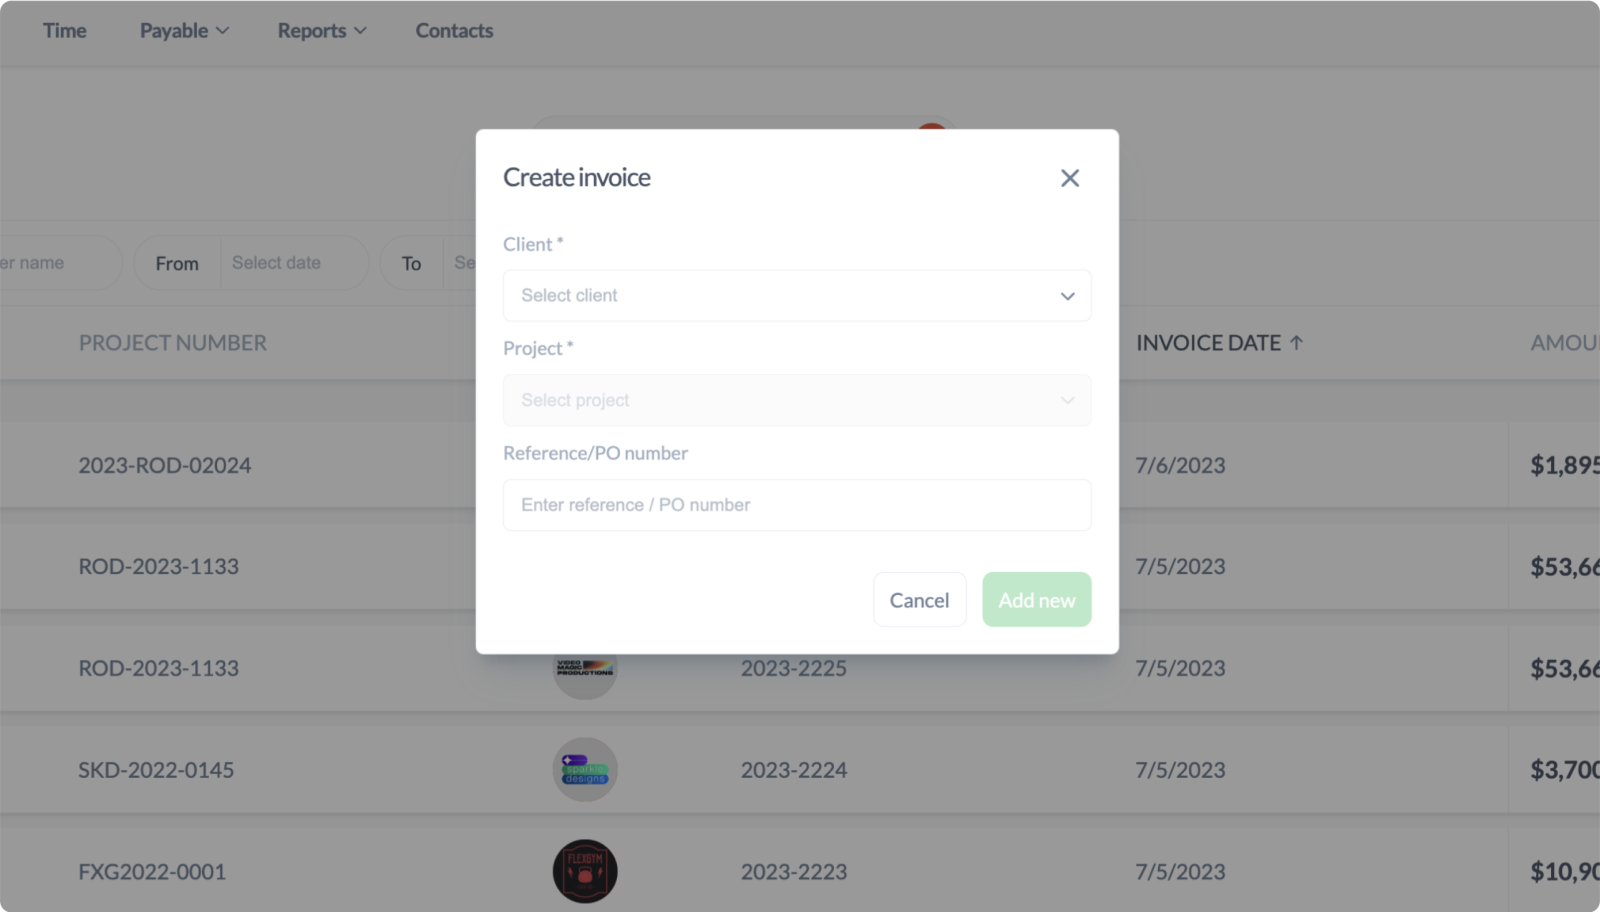 Creating an invoice in Rodeo